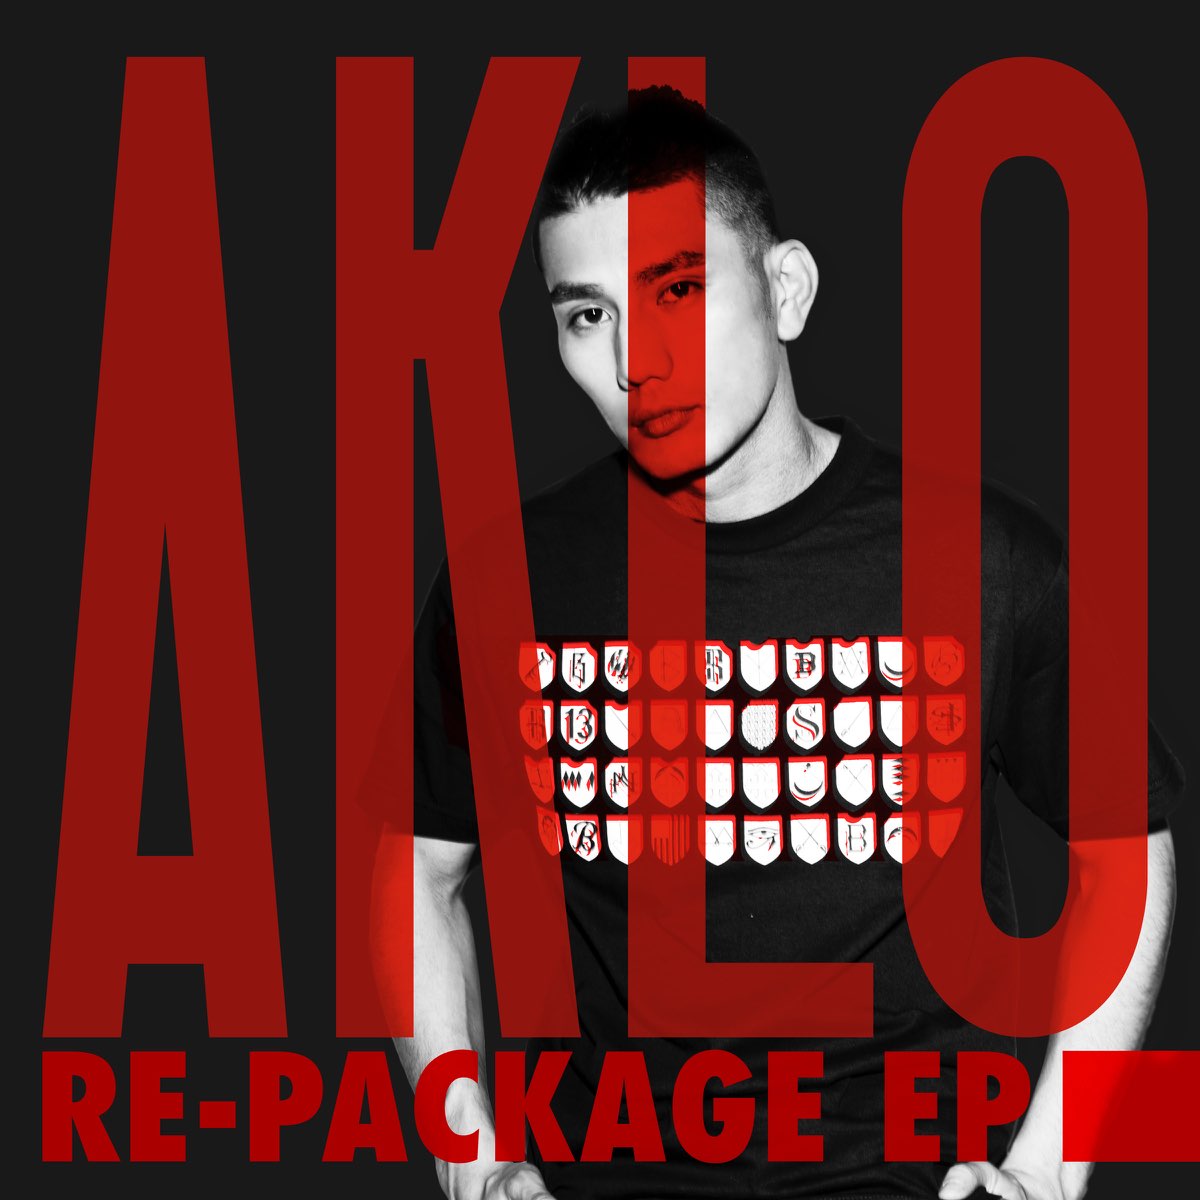 RE-PACKAGE EP - Album by AKLO - Apple Music